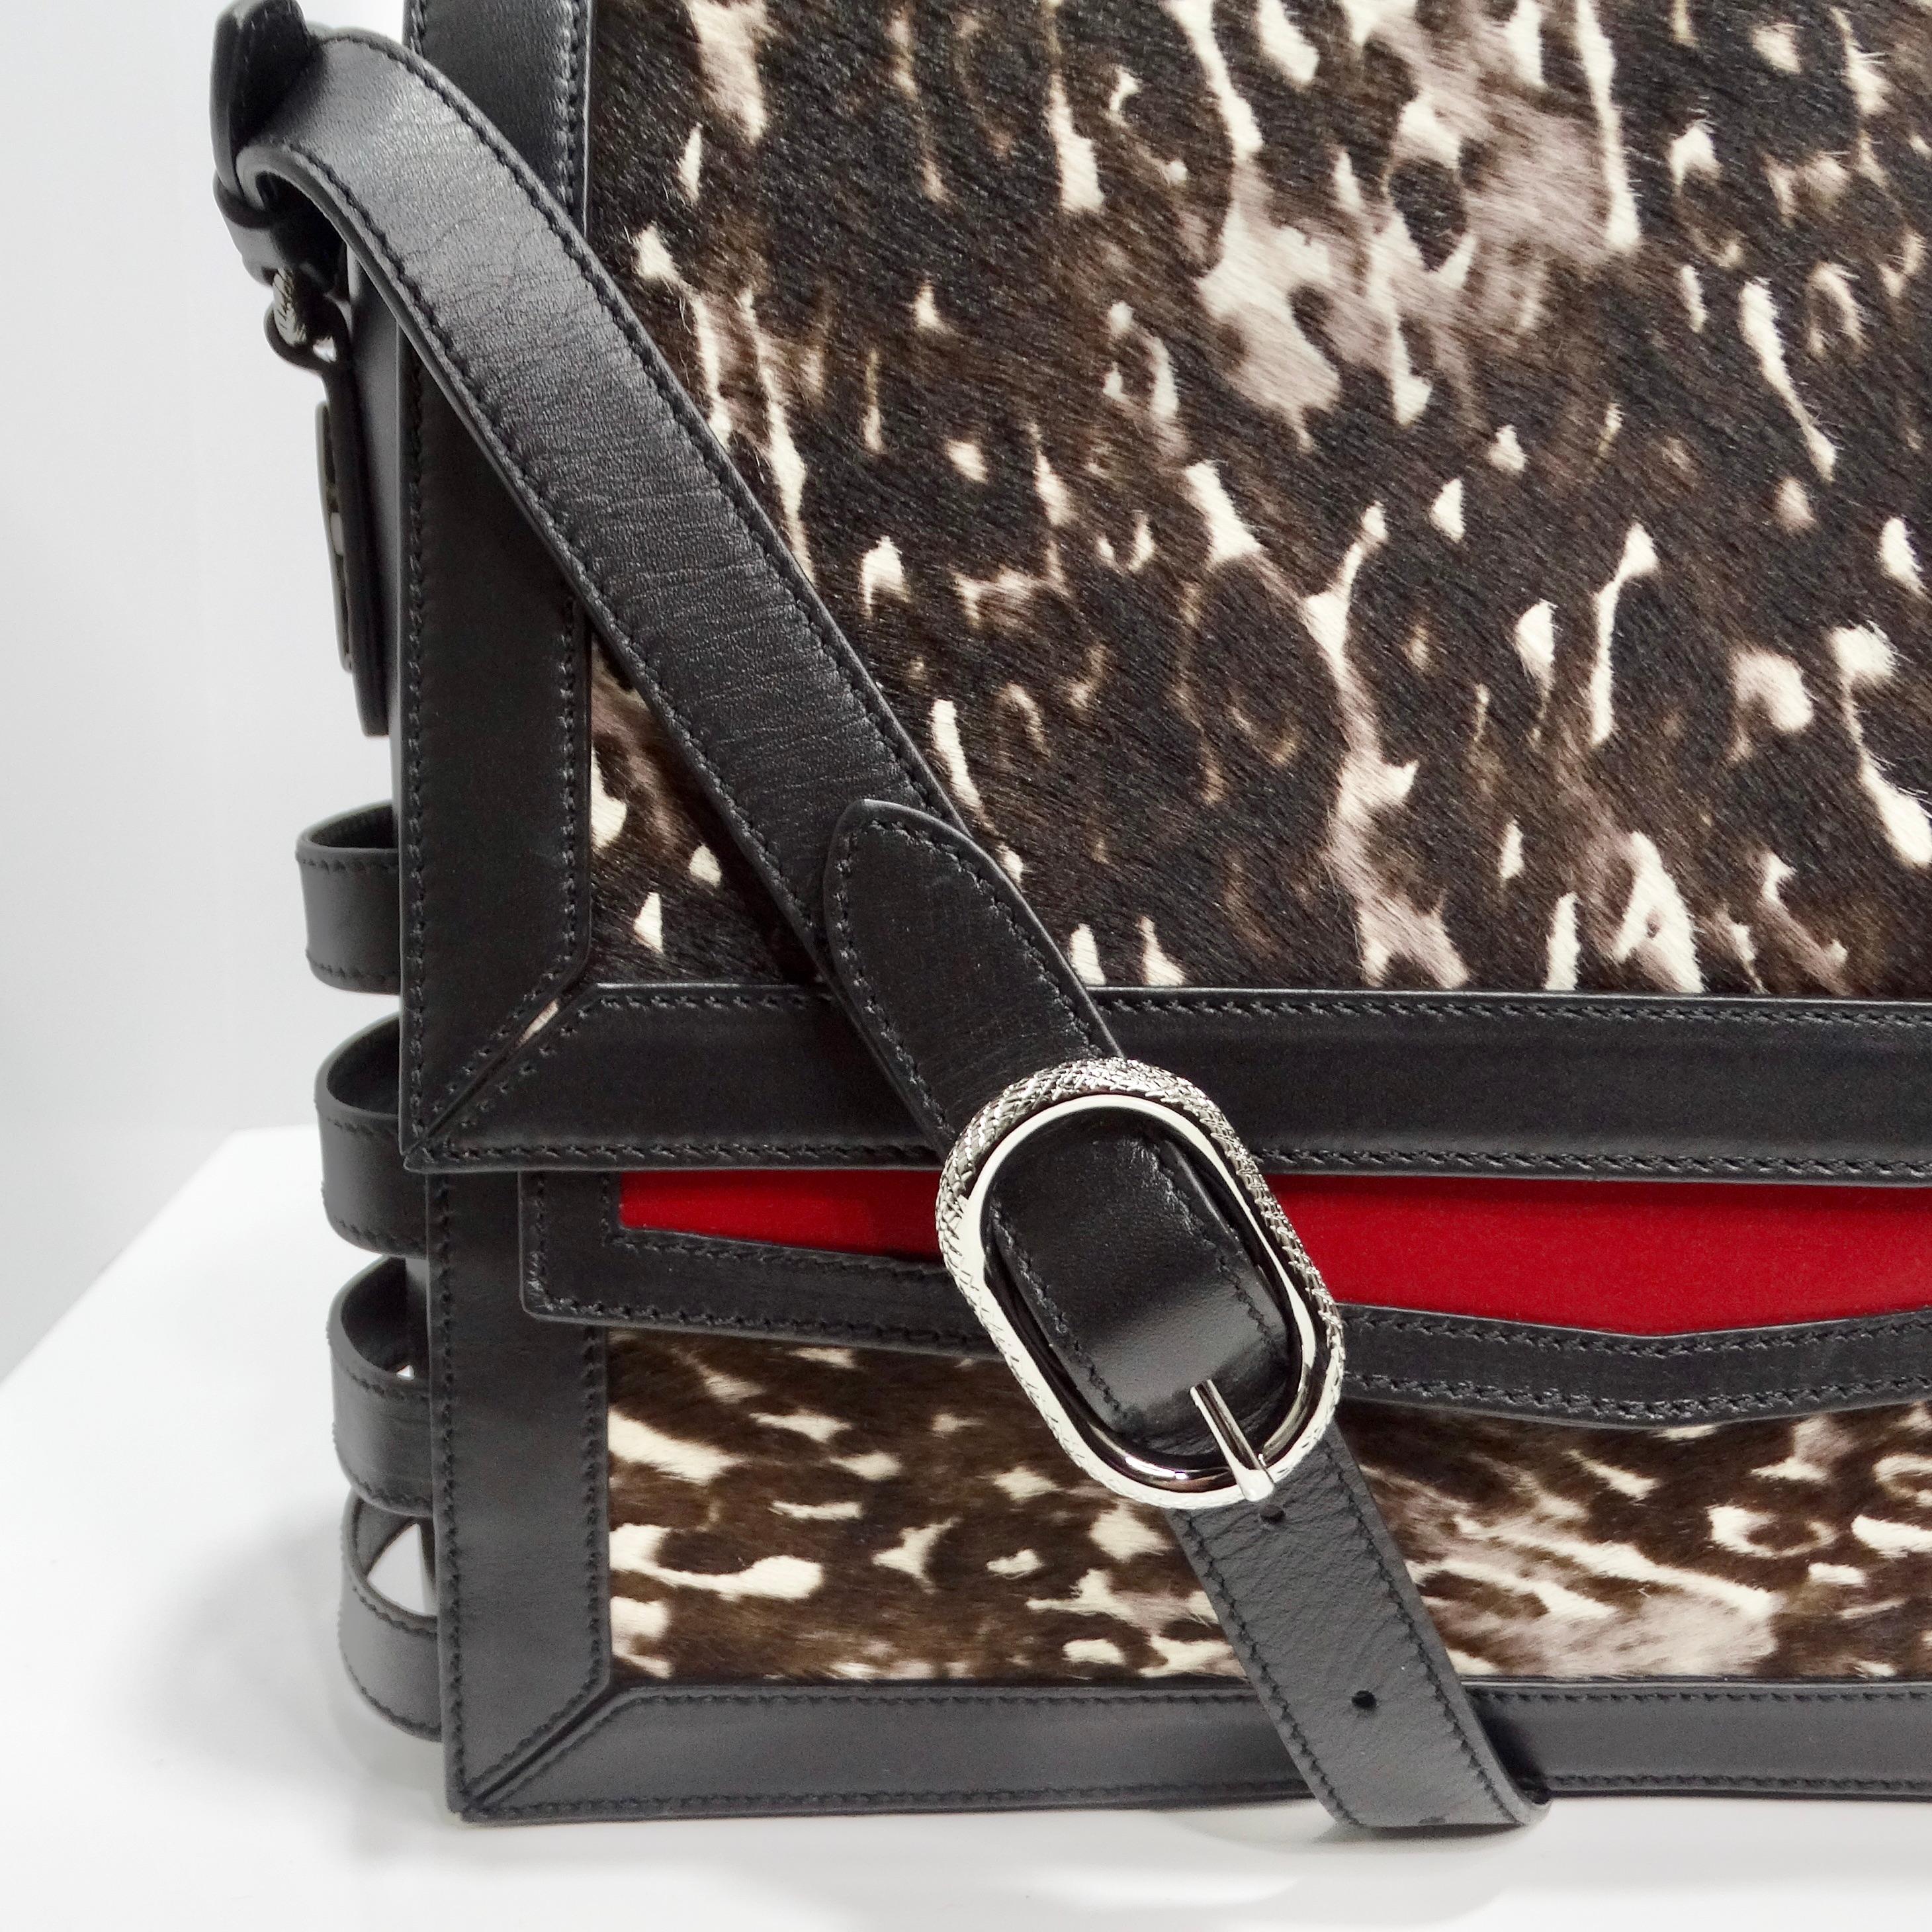 Christian Louboutin Pony Hair Crossbody Flap Bag In Excellent Condition For Sale In Scottsdale, AZ